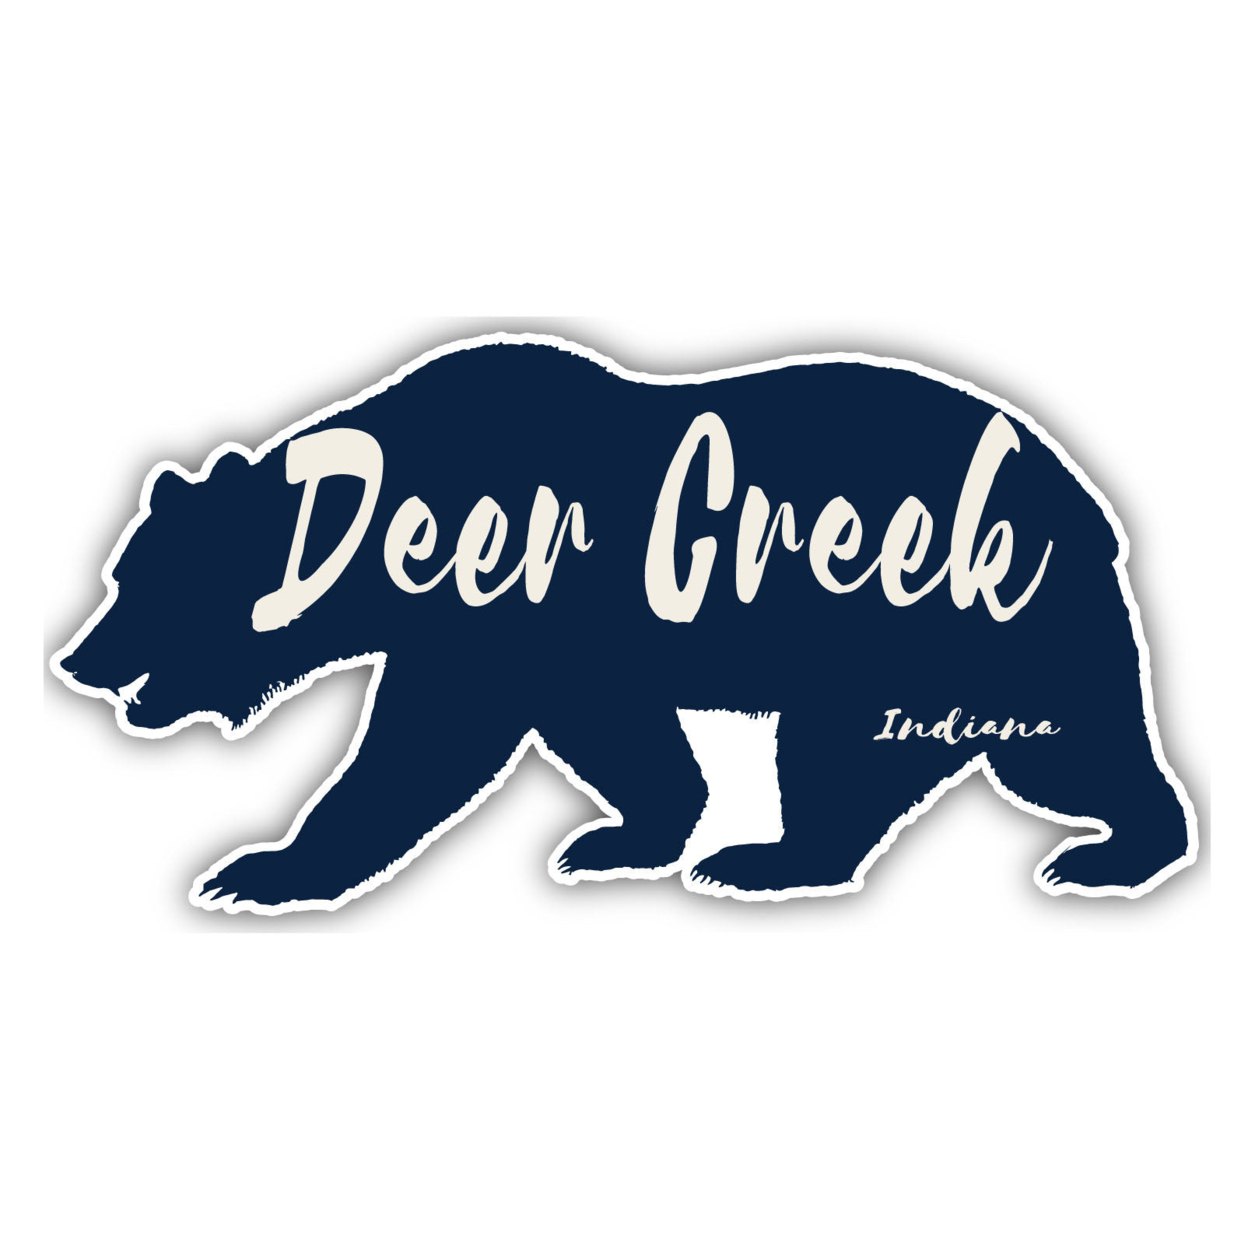 Deer Creek Indiana Souvenir Decorative Stickers (Choose Theme And Size) - 4-Pack, 8-Inch, Bear